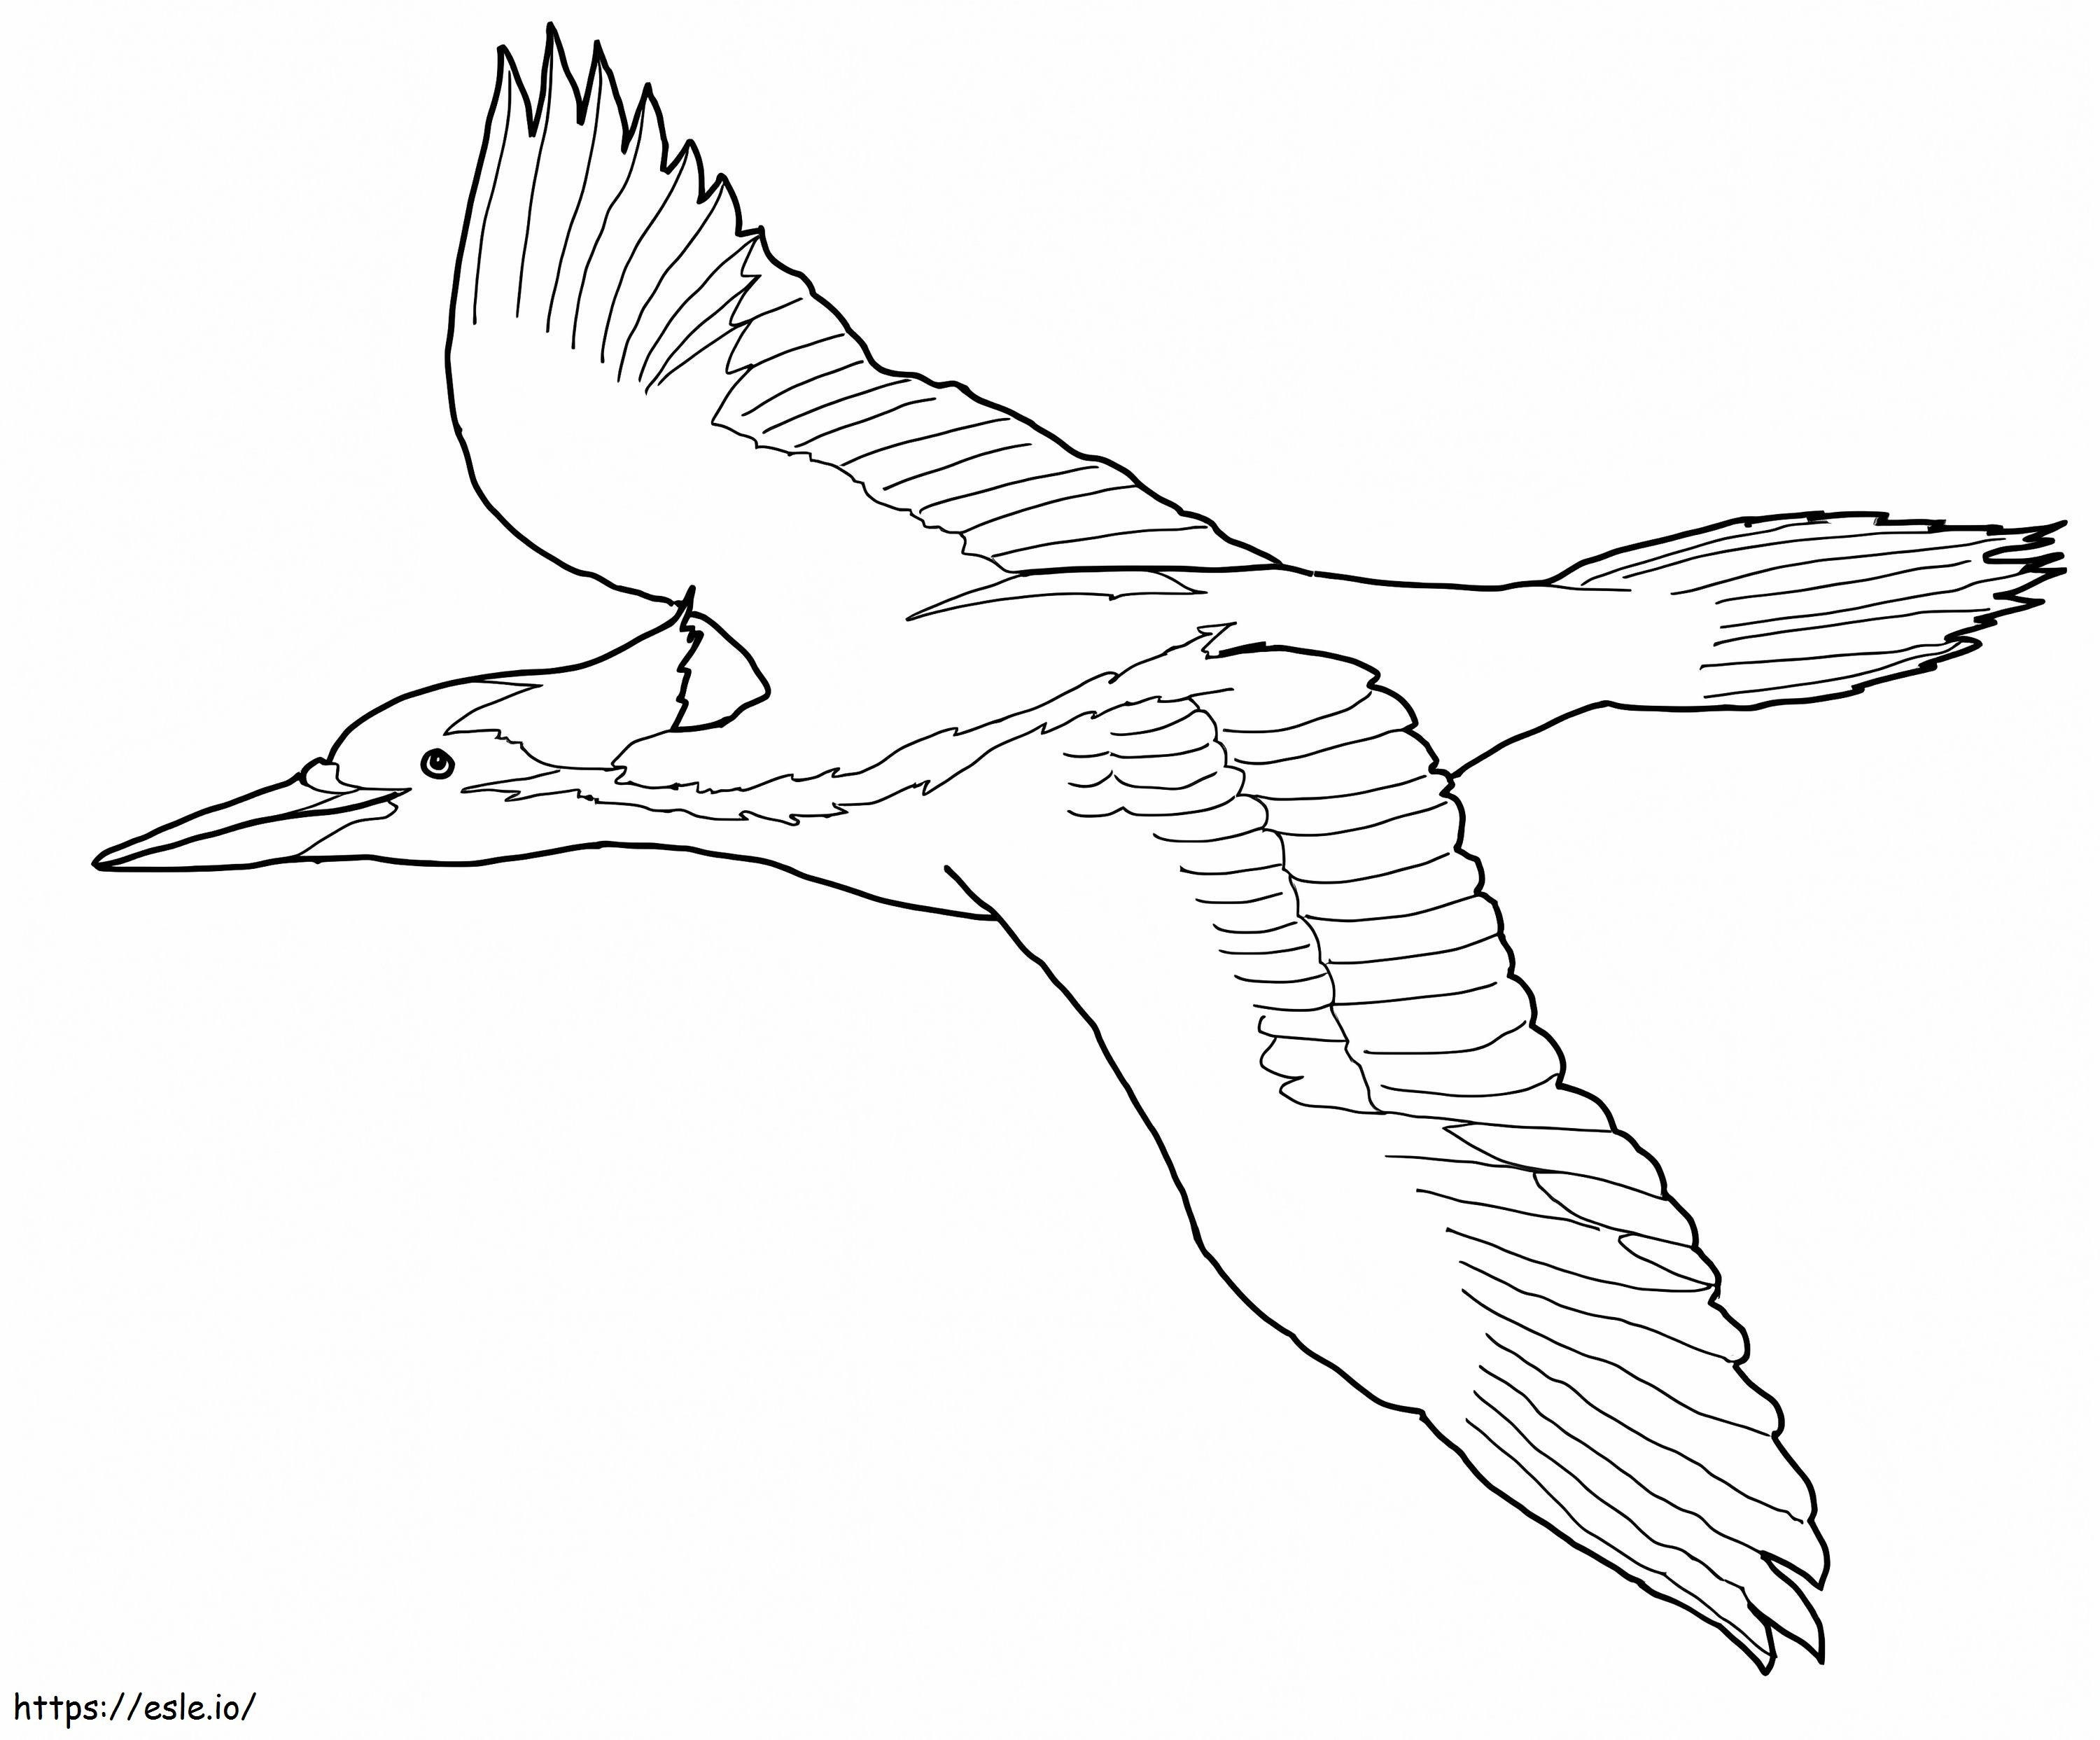 Ivory Billed Woodpecker coloring page